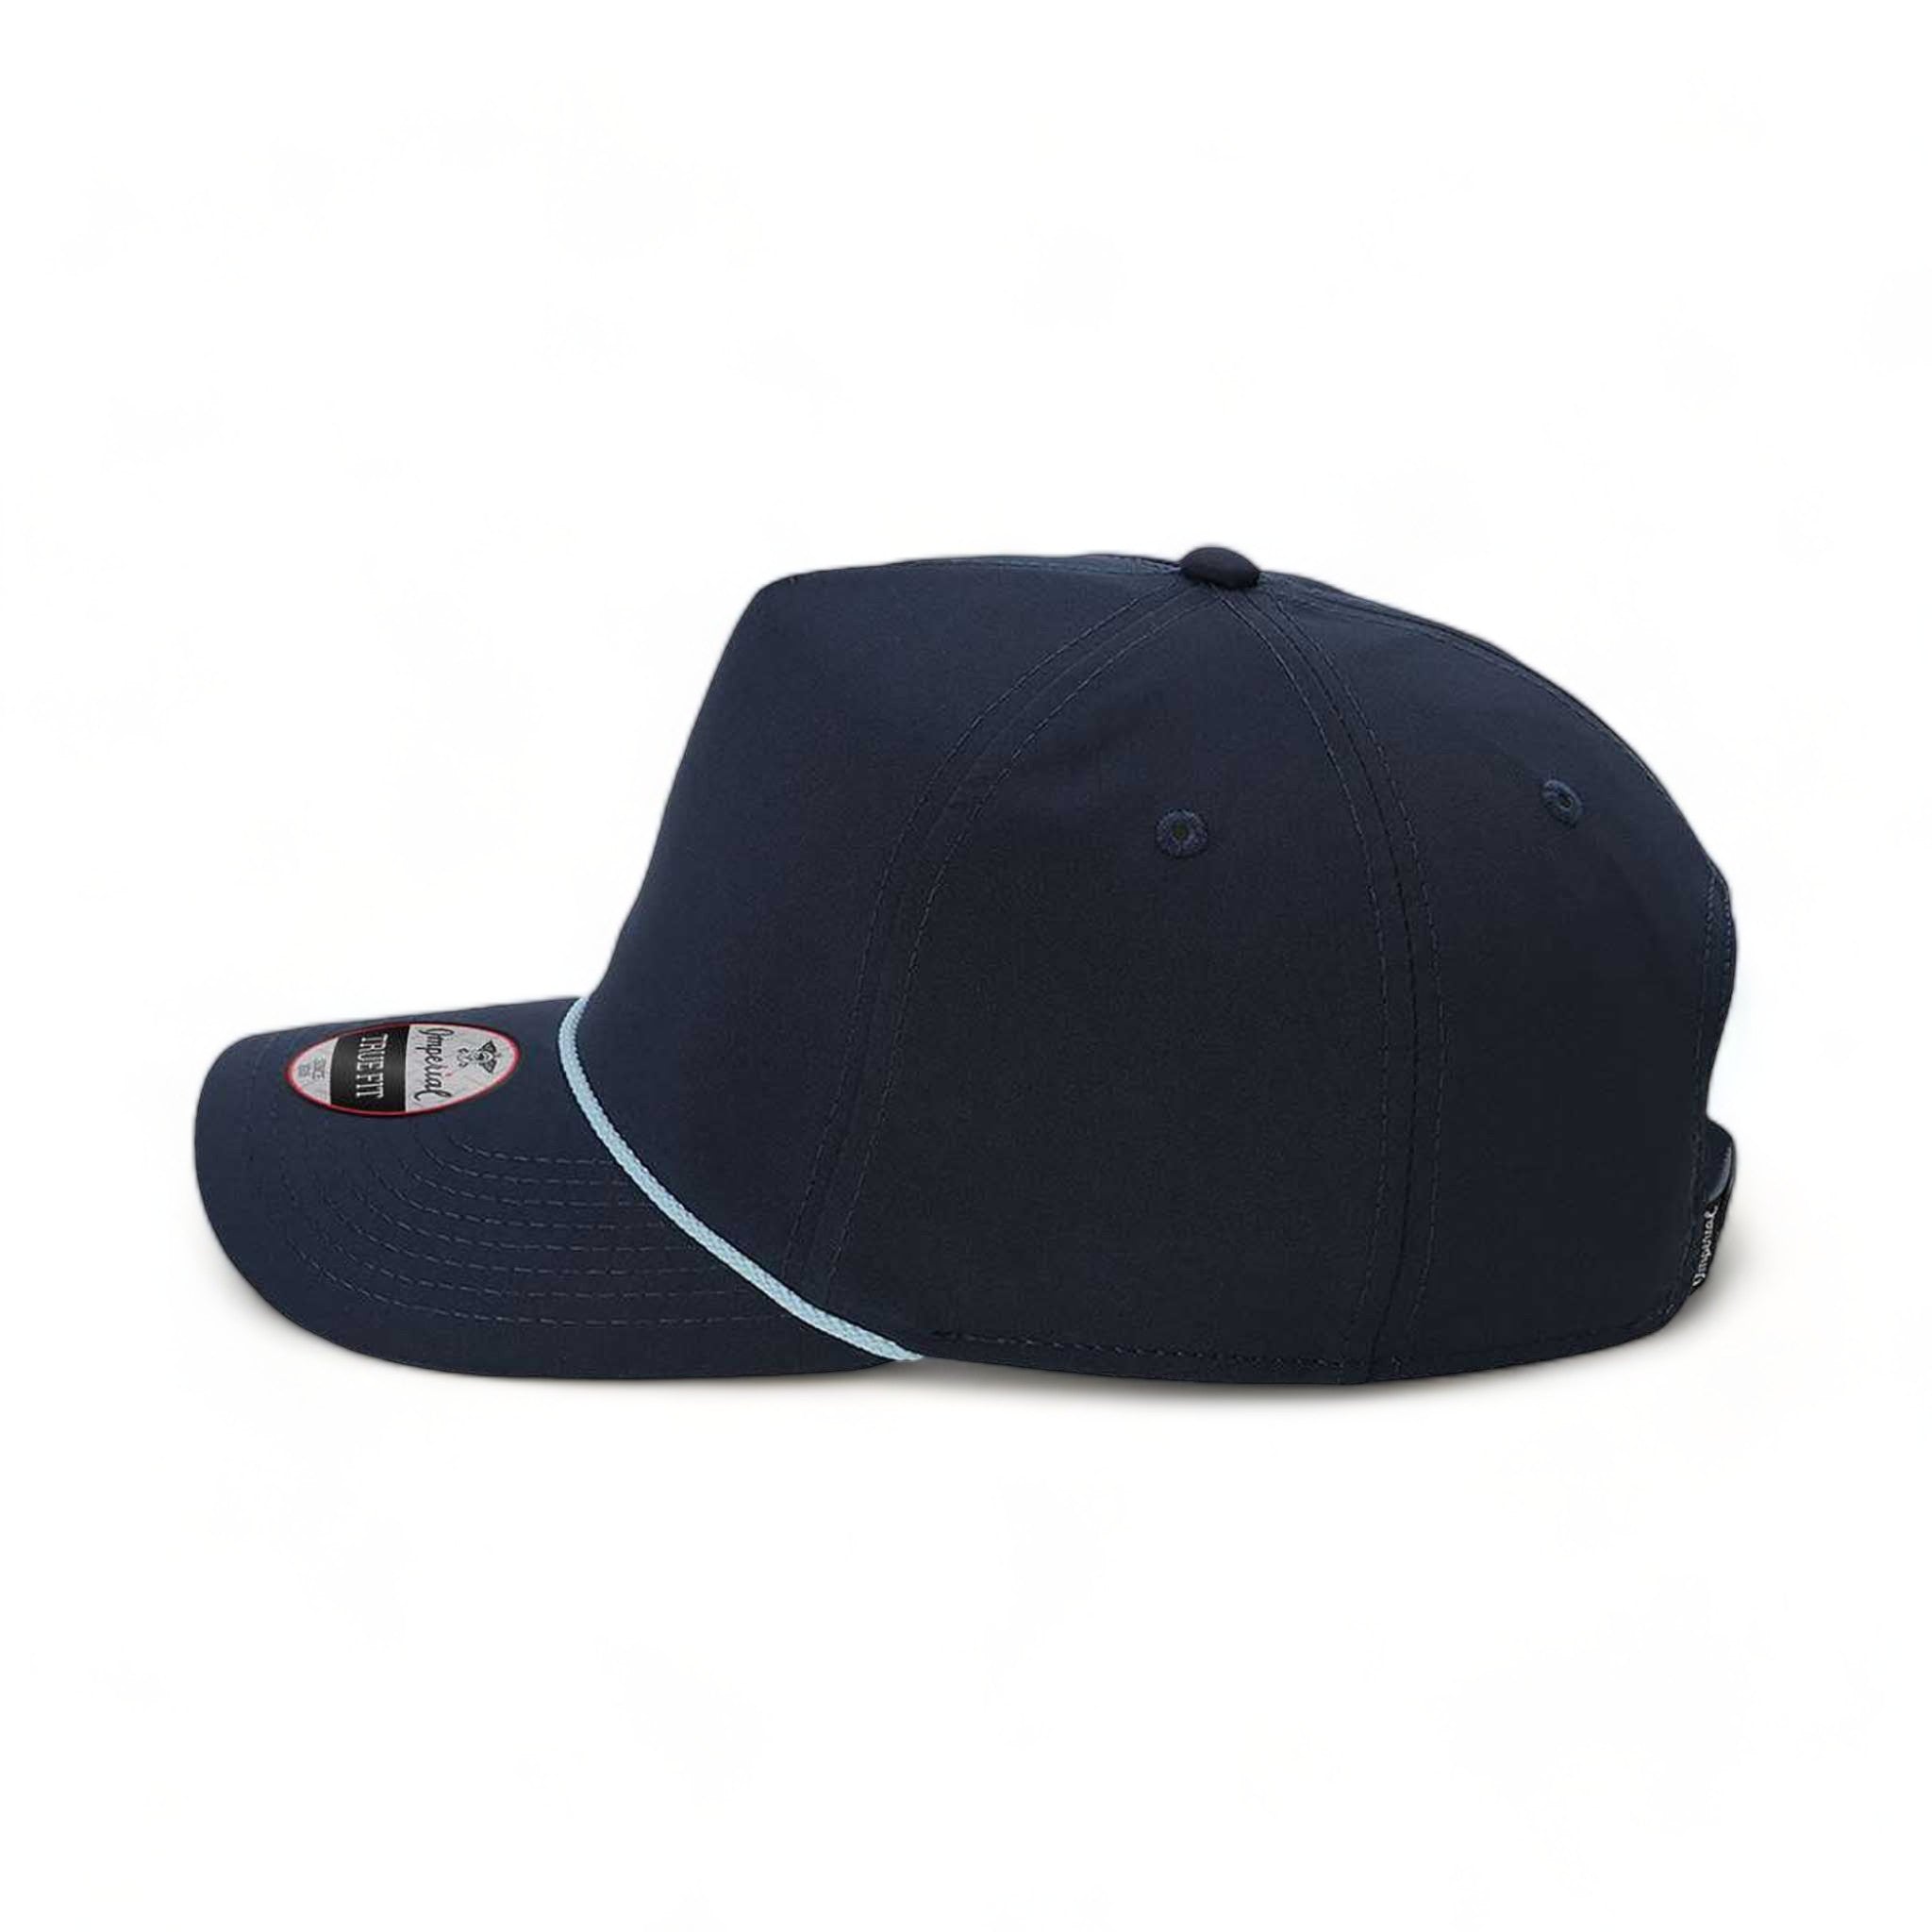 Side view of Imperial 5054 custom hat in navy and light blue